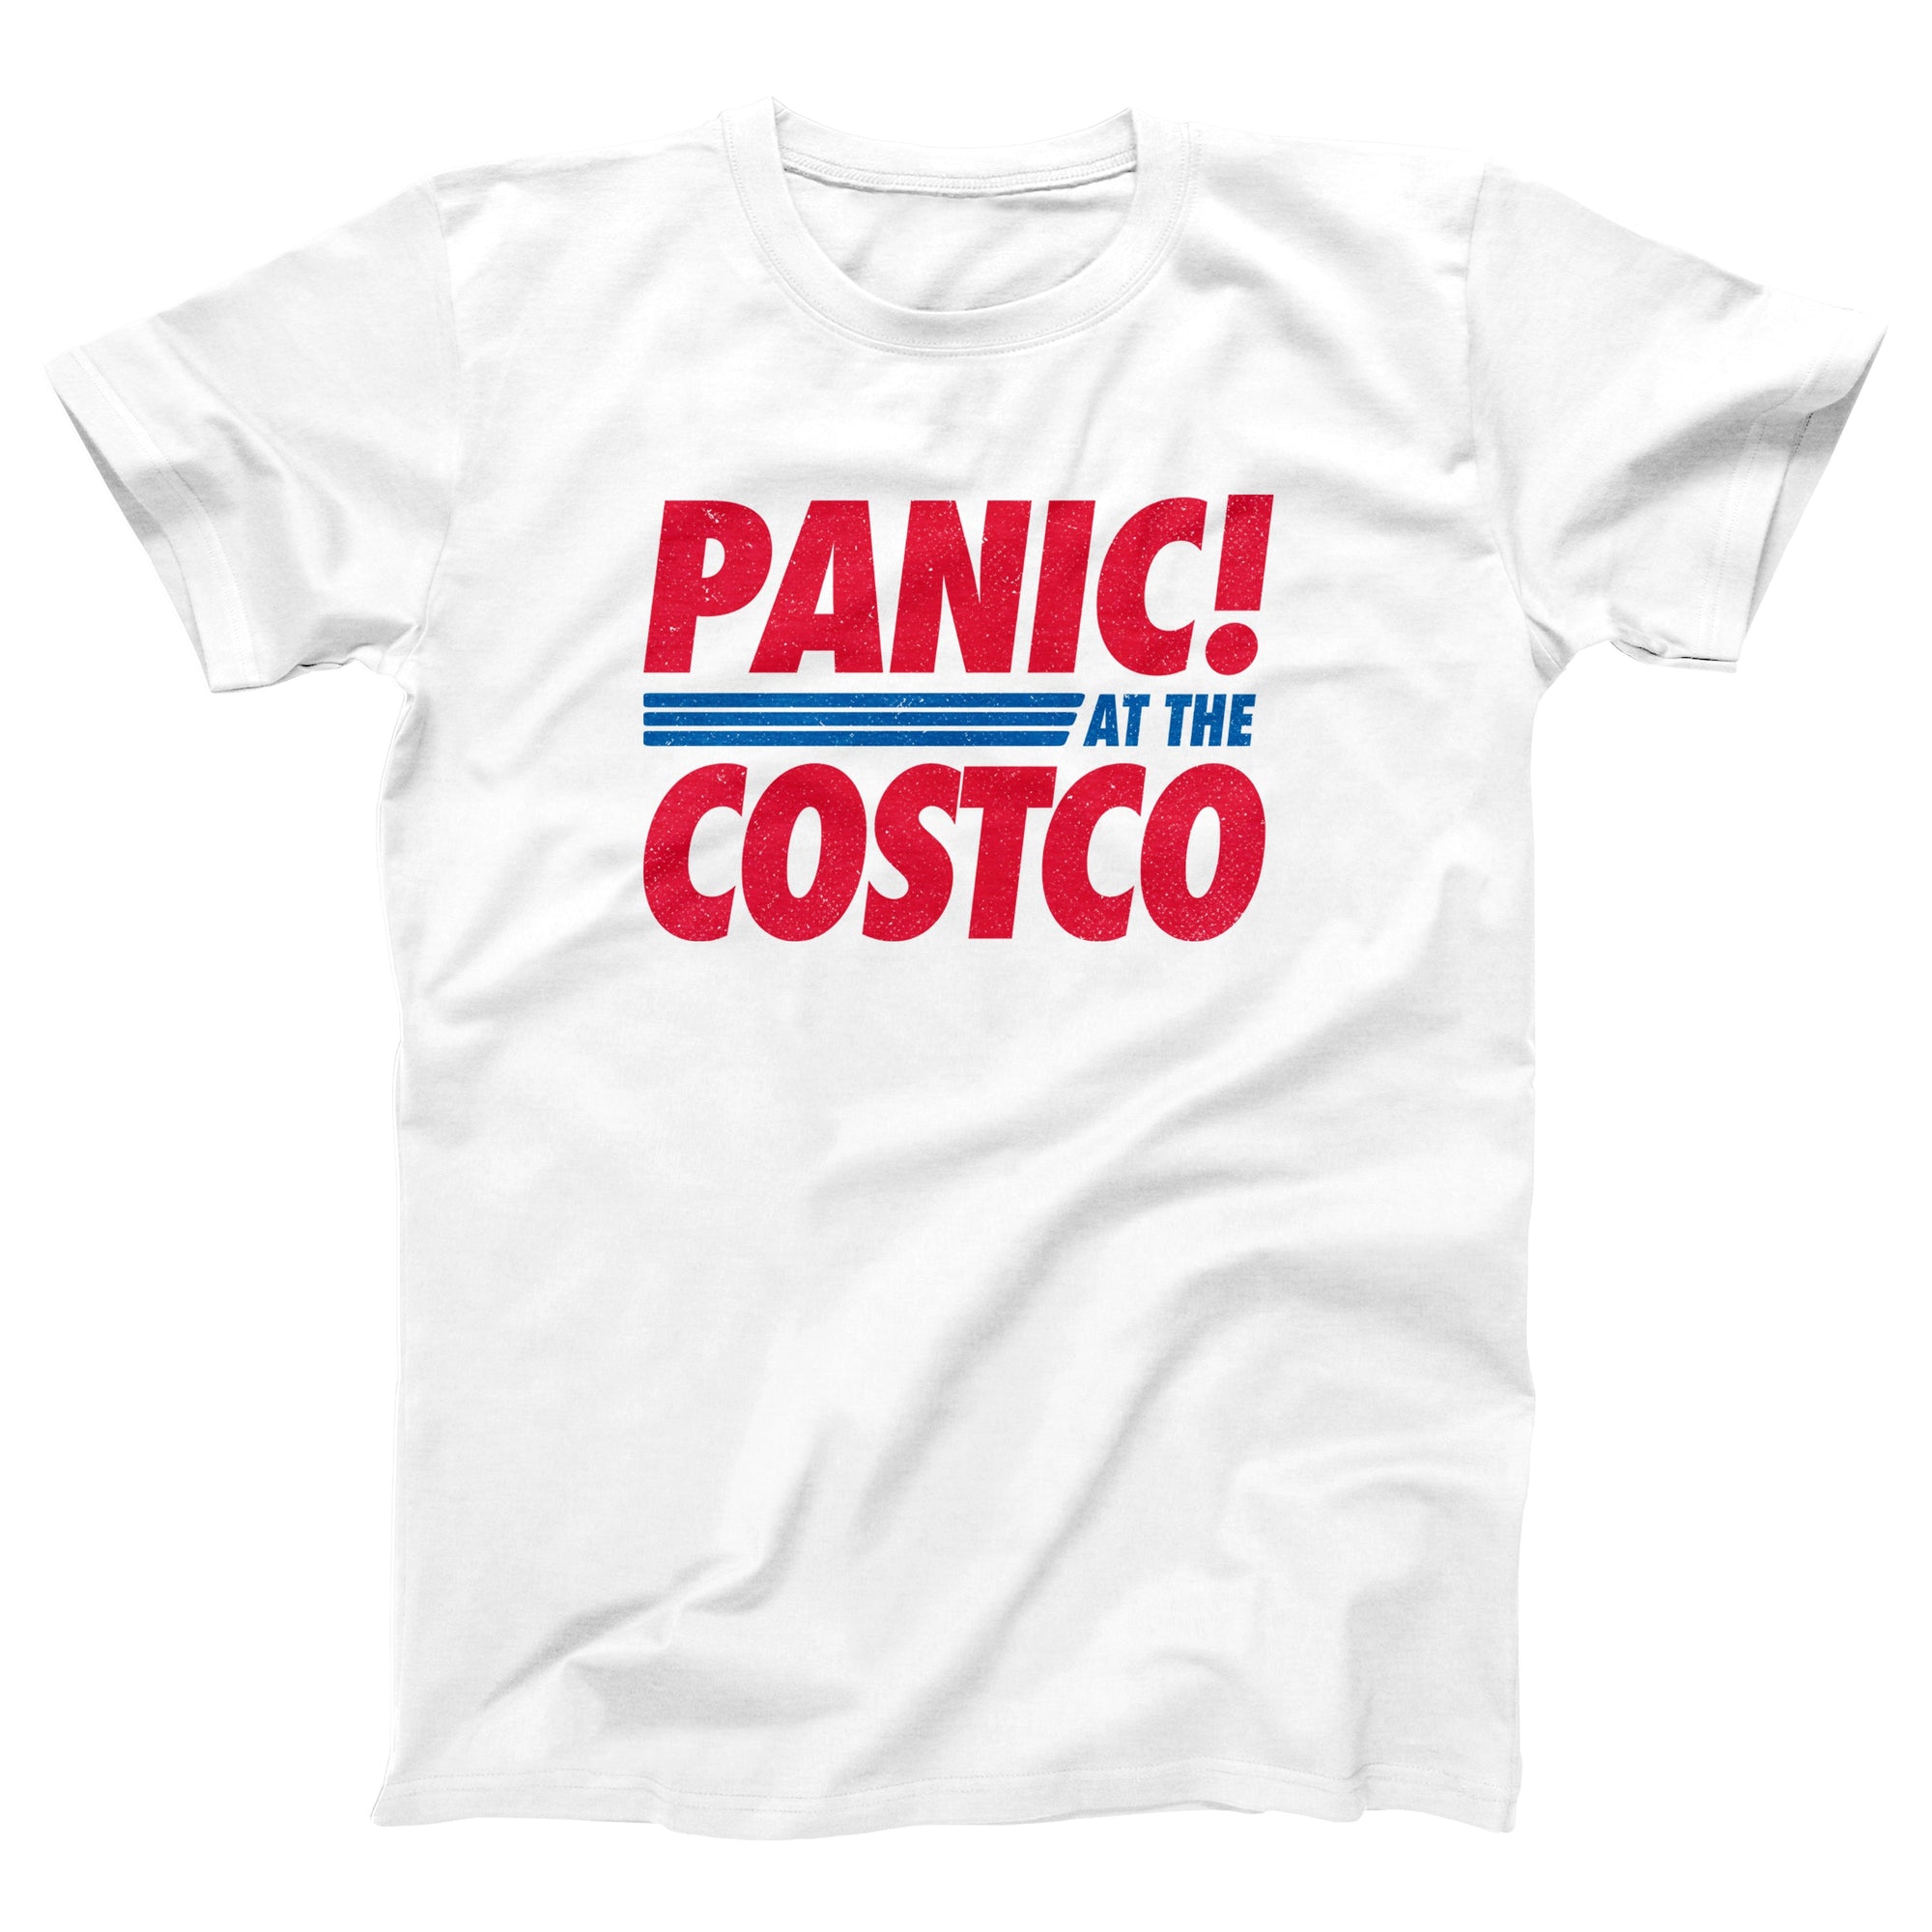 Panic At The Costco Adult Unisex T-Shirt